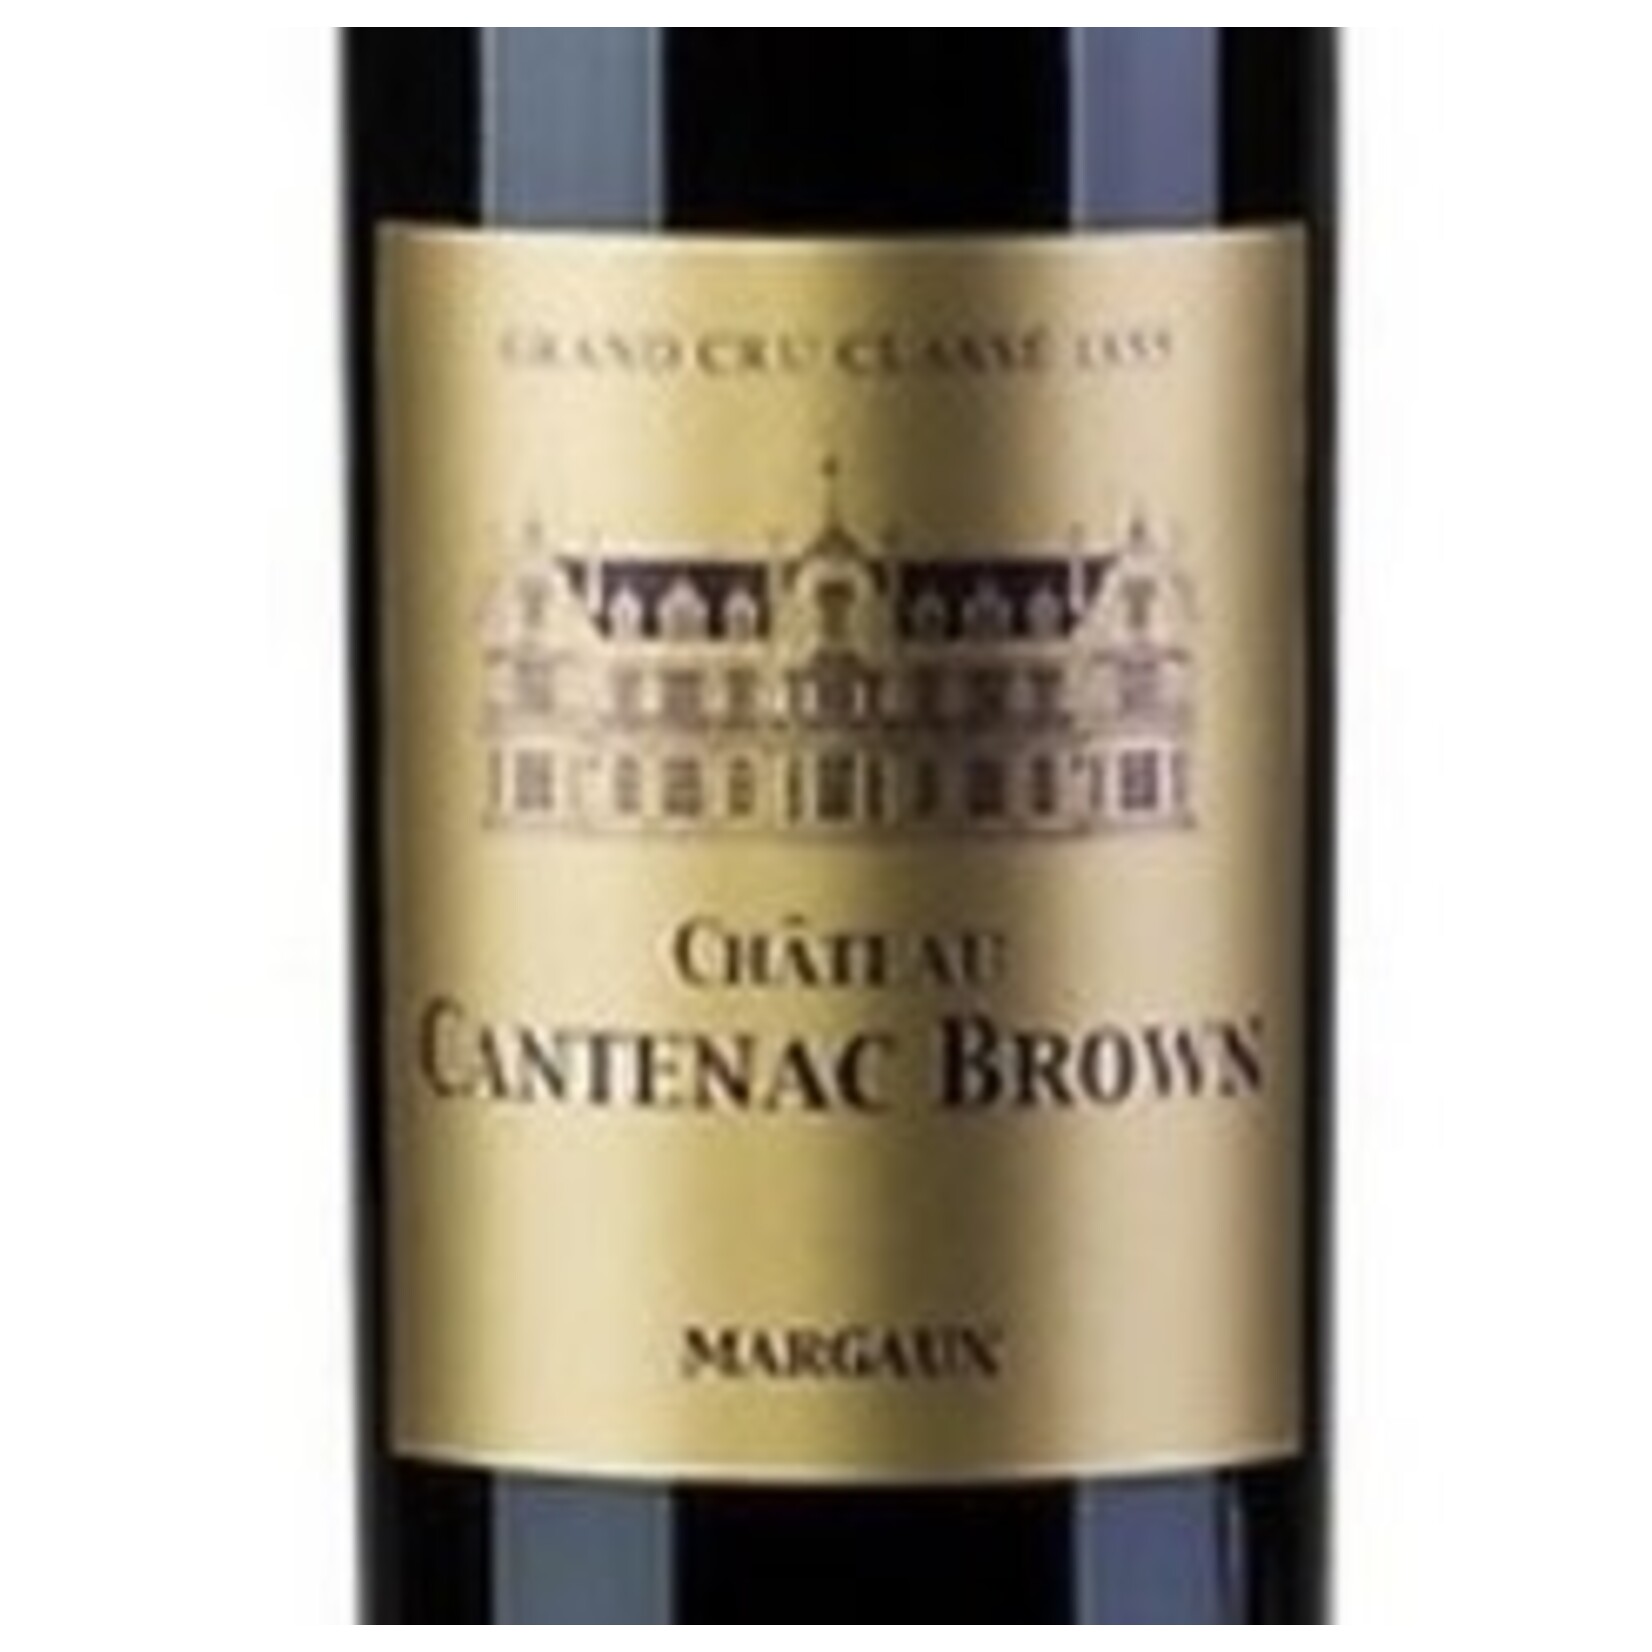 Wine Chateau Cantenac Brown Margaux 1996